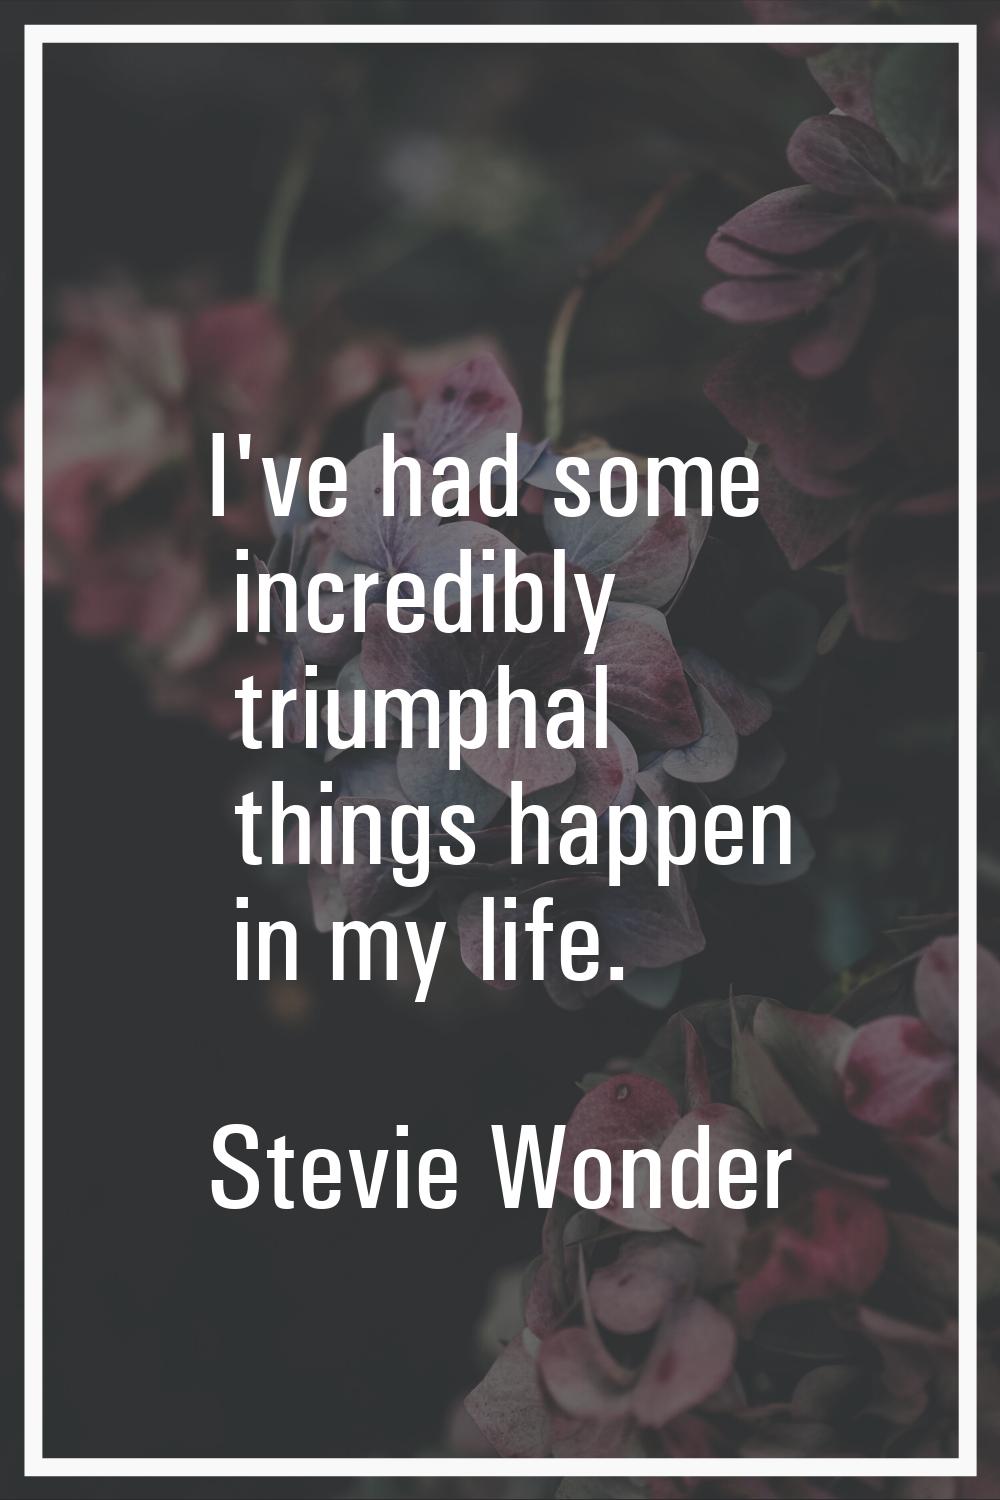 I've had some incredibly triumphal things happen in my life.